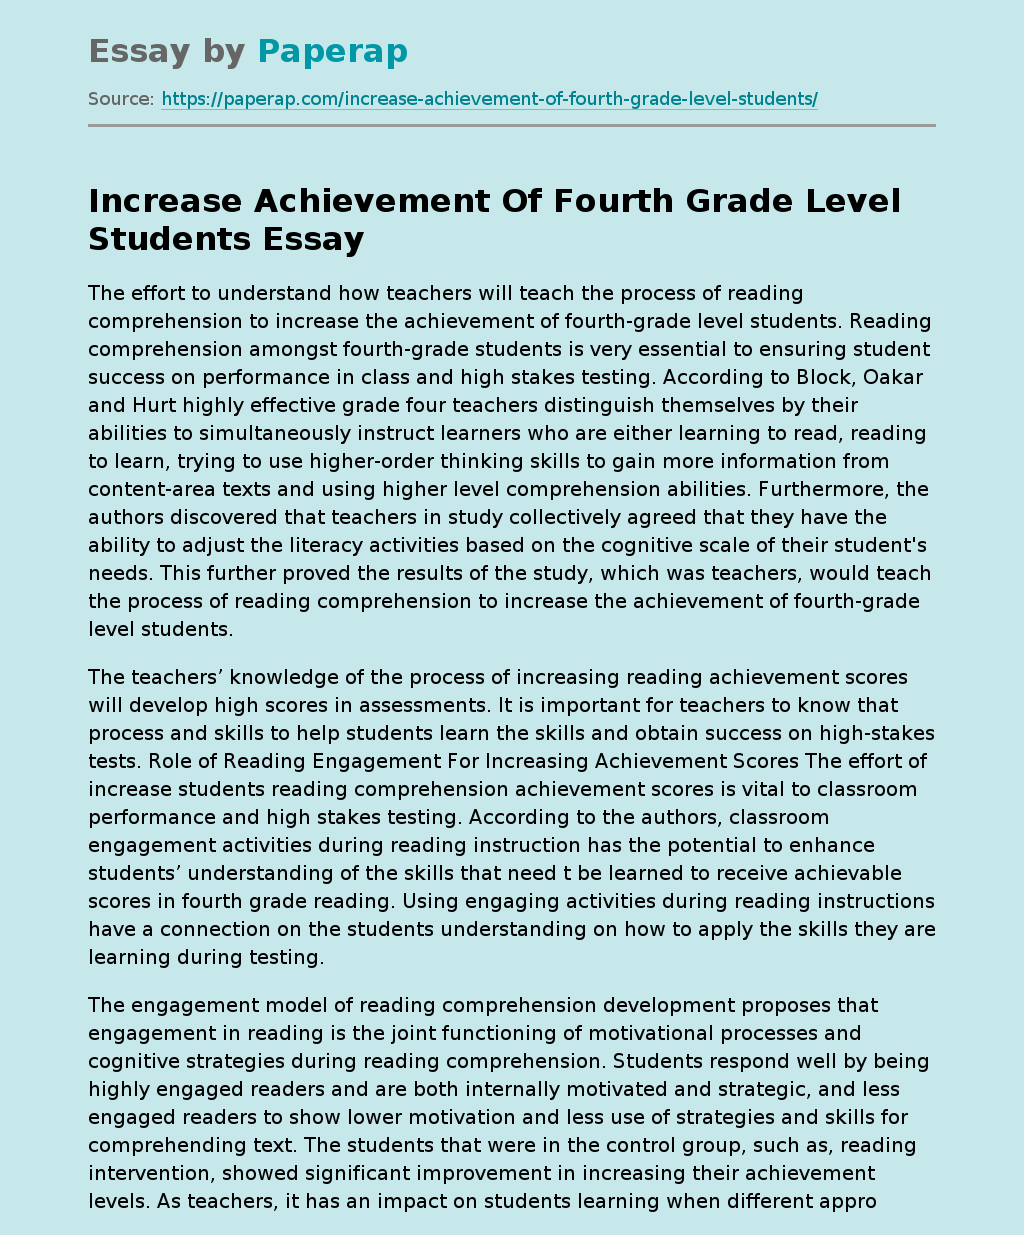 Increase Achievement Of Fourth Grade Level Students